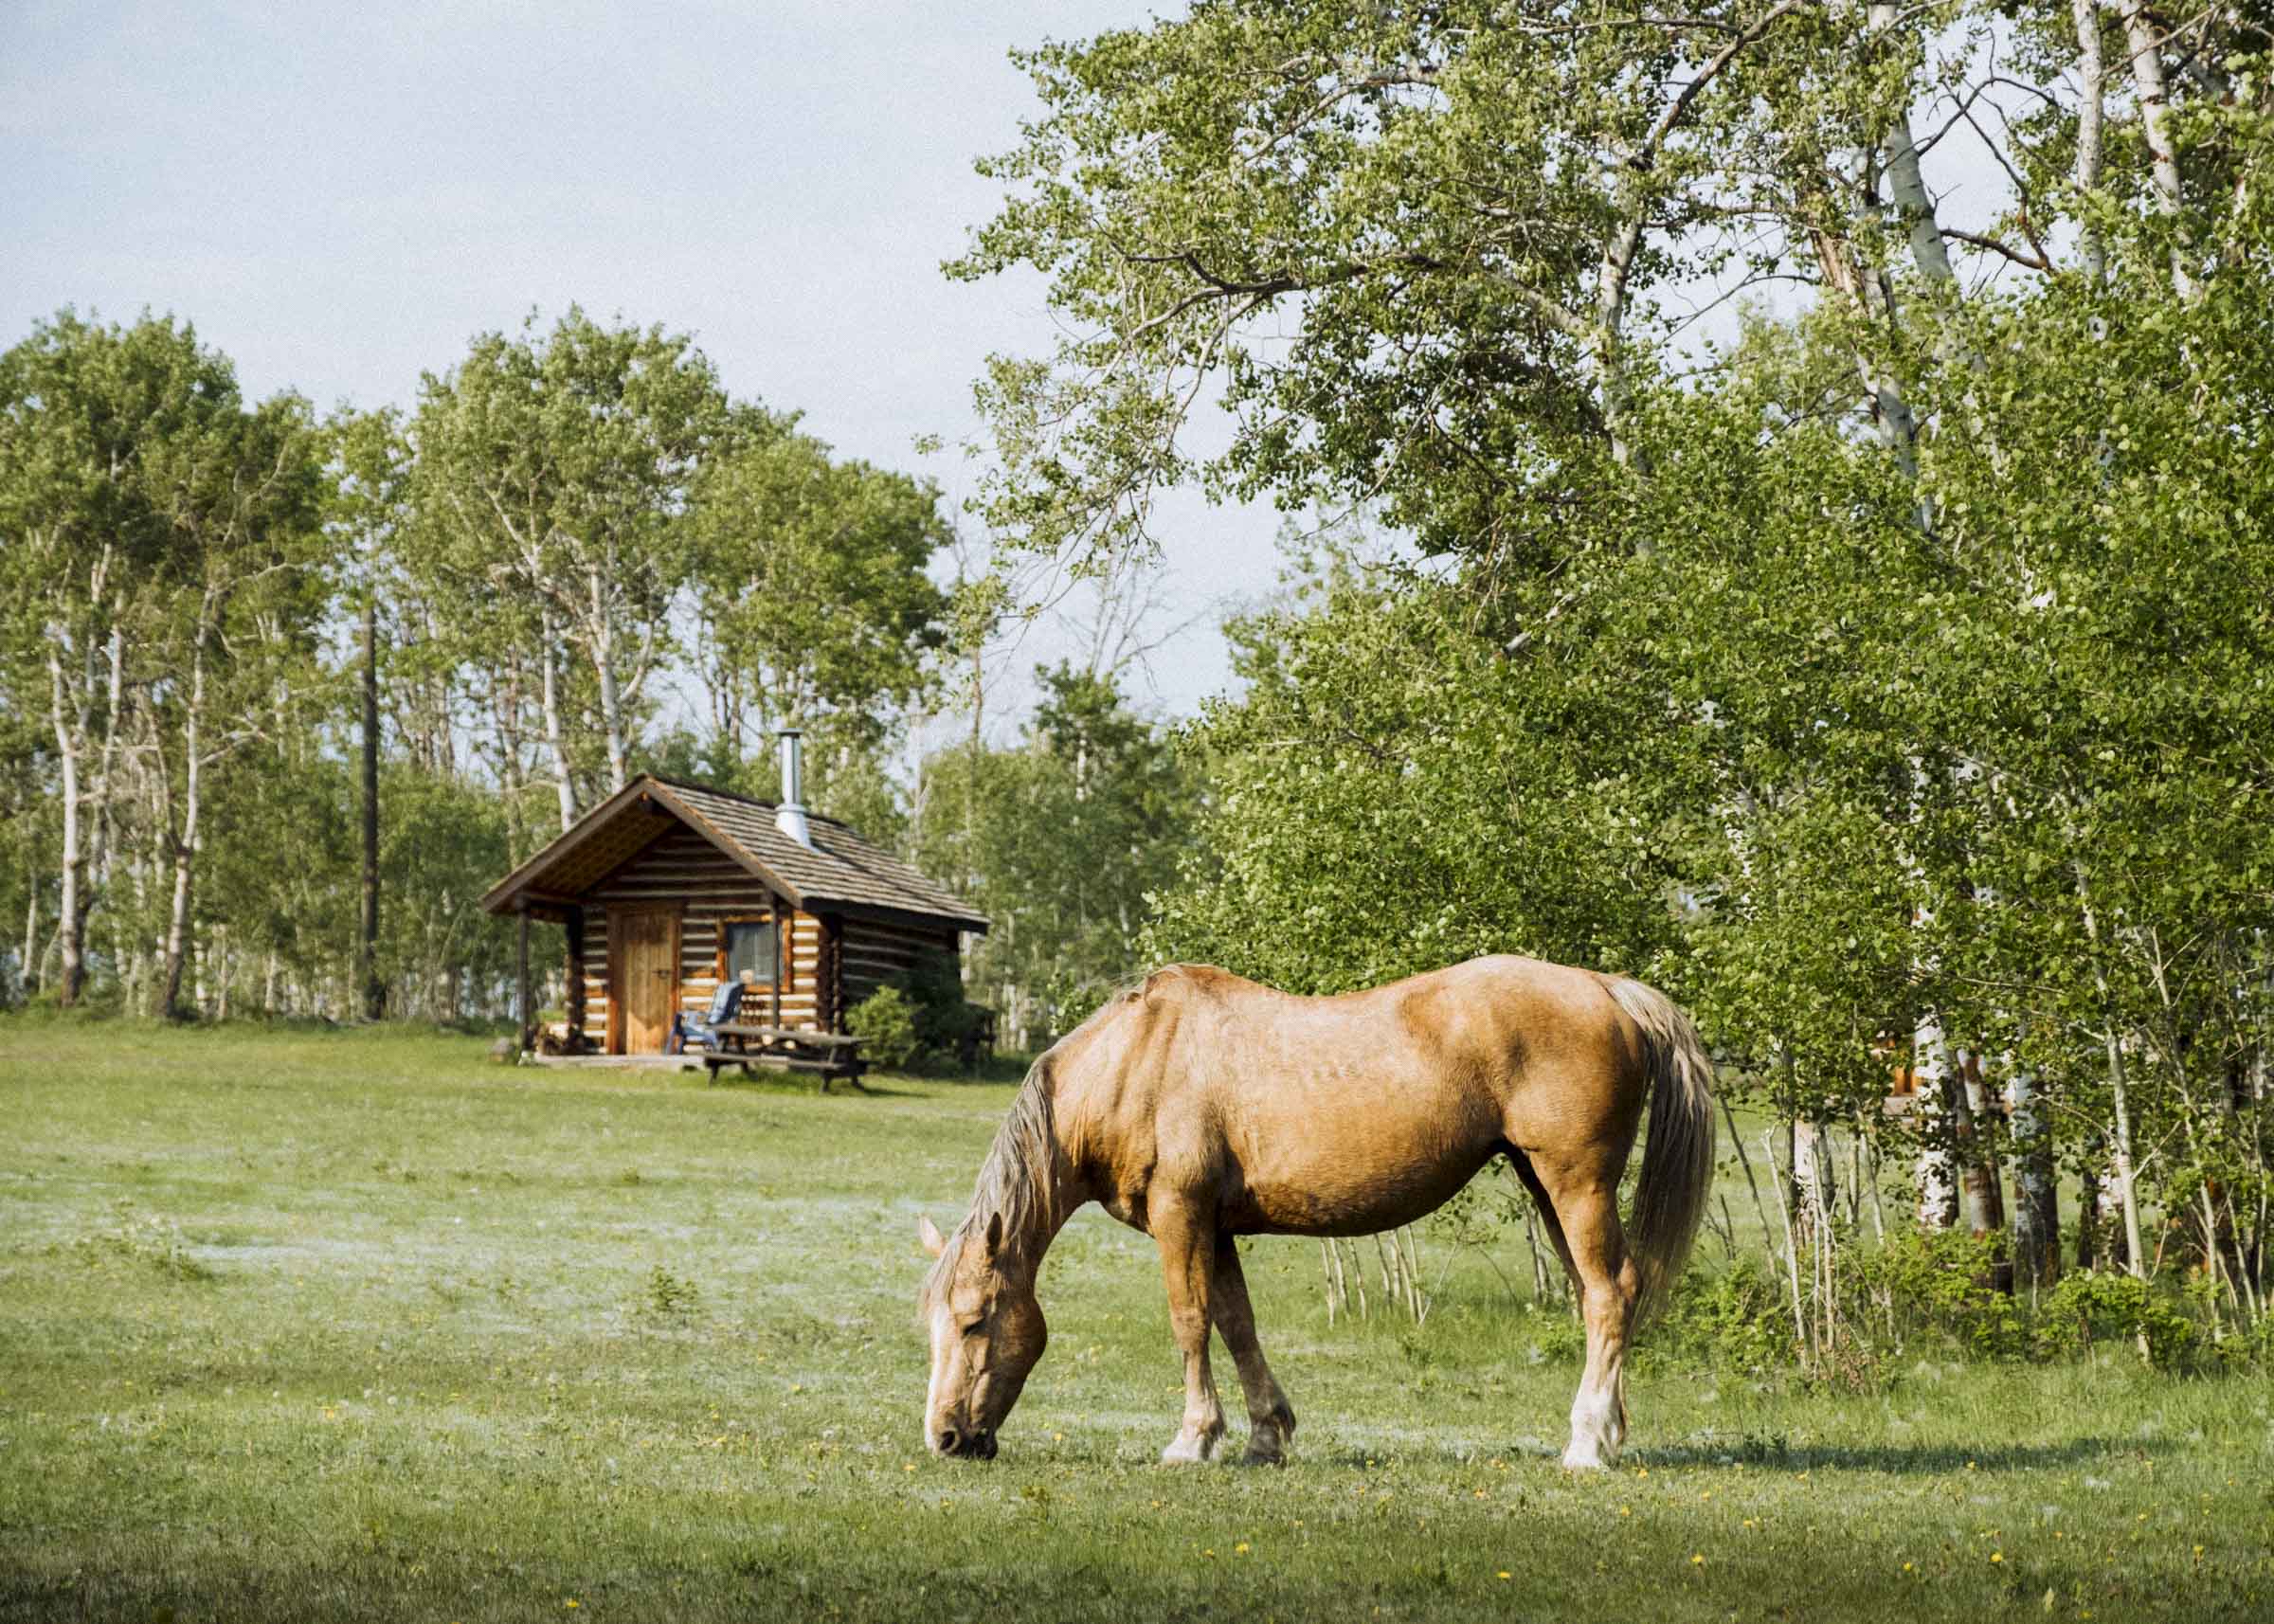 Horses grazing in the field in front of the cabins at Flying U Ranch